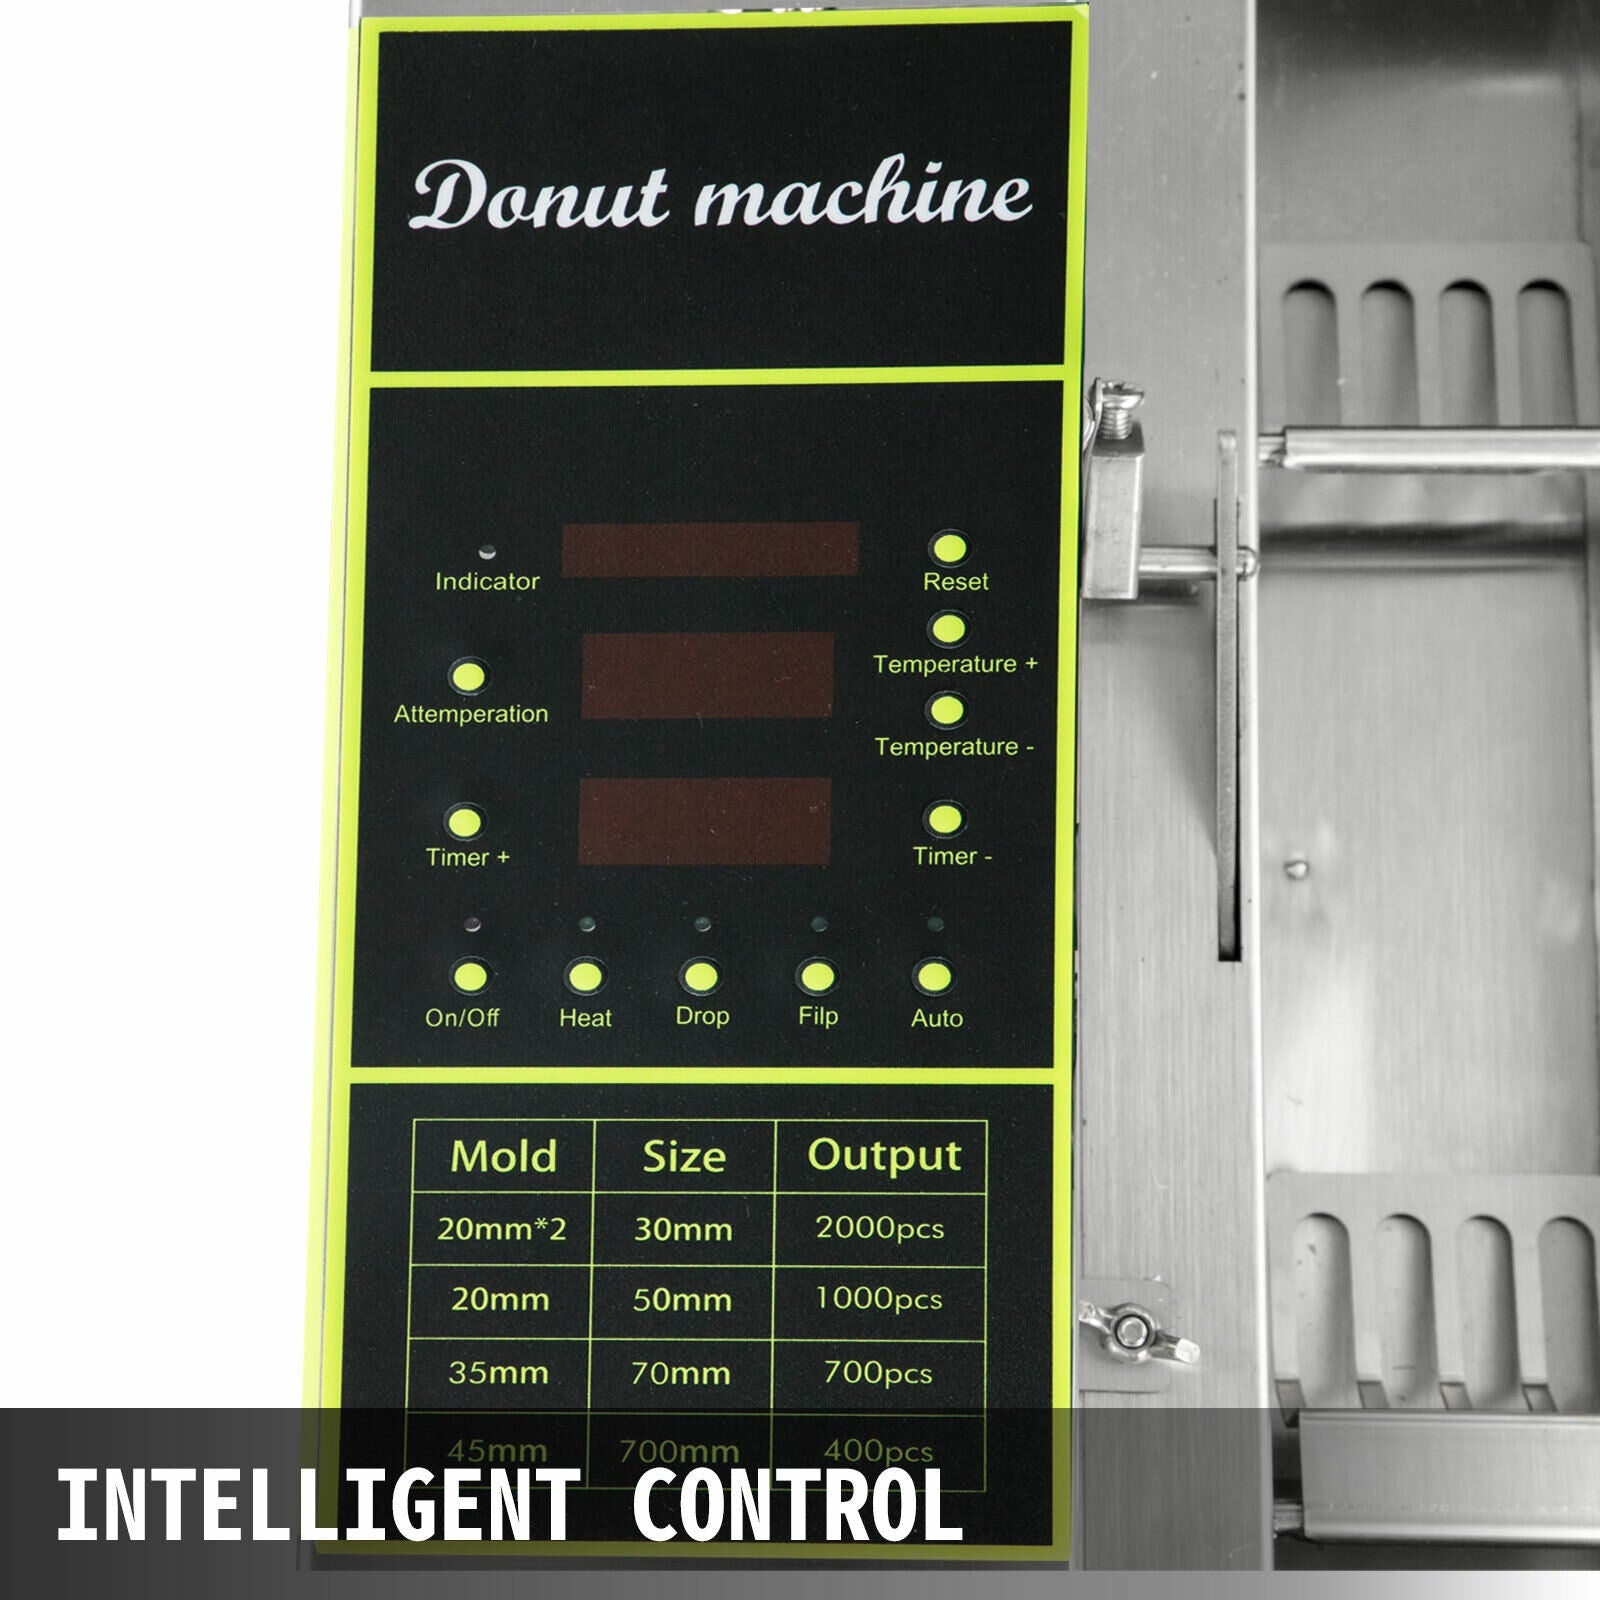 Commercial Automatic Donut Maker Machine Fryer w/ 3 Sets Mold 2 Trays 3KW